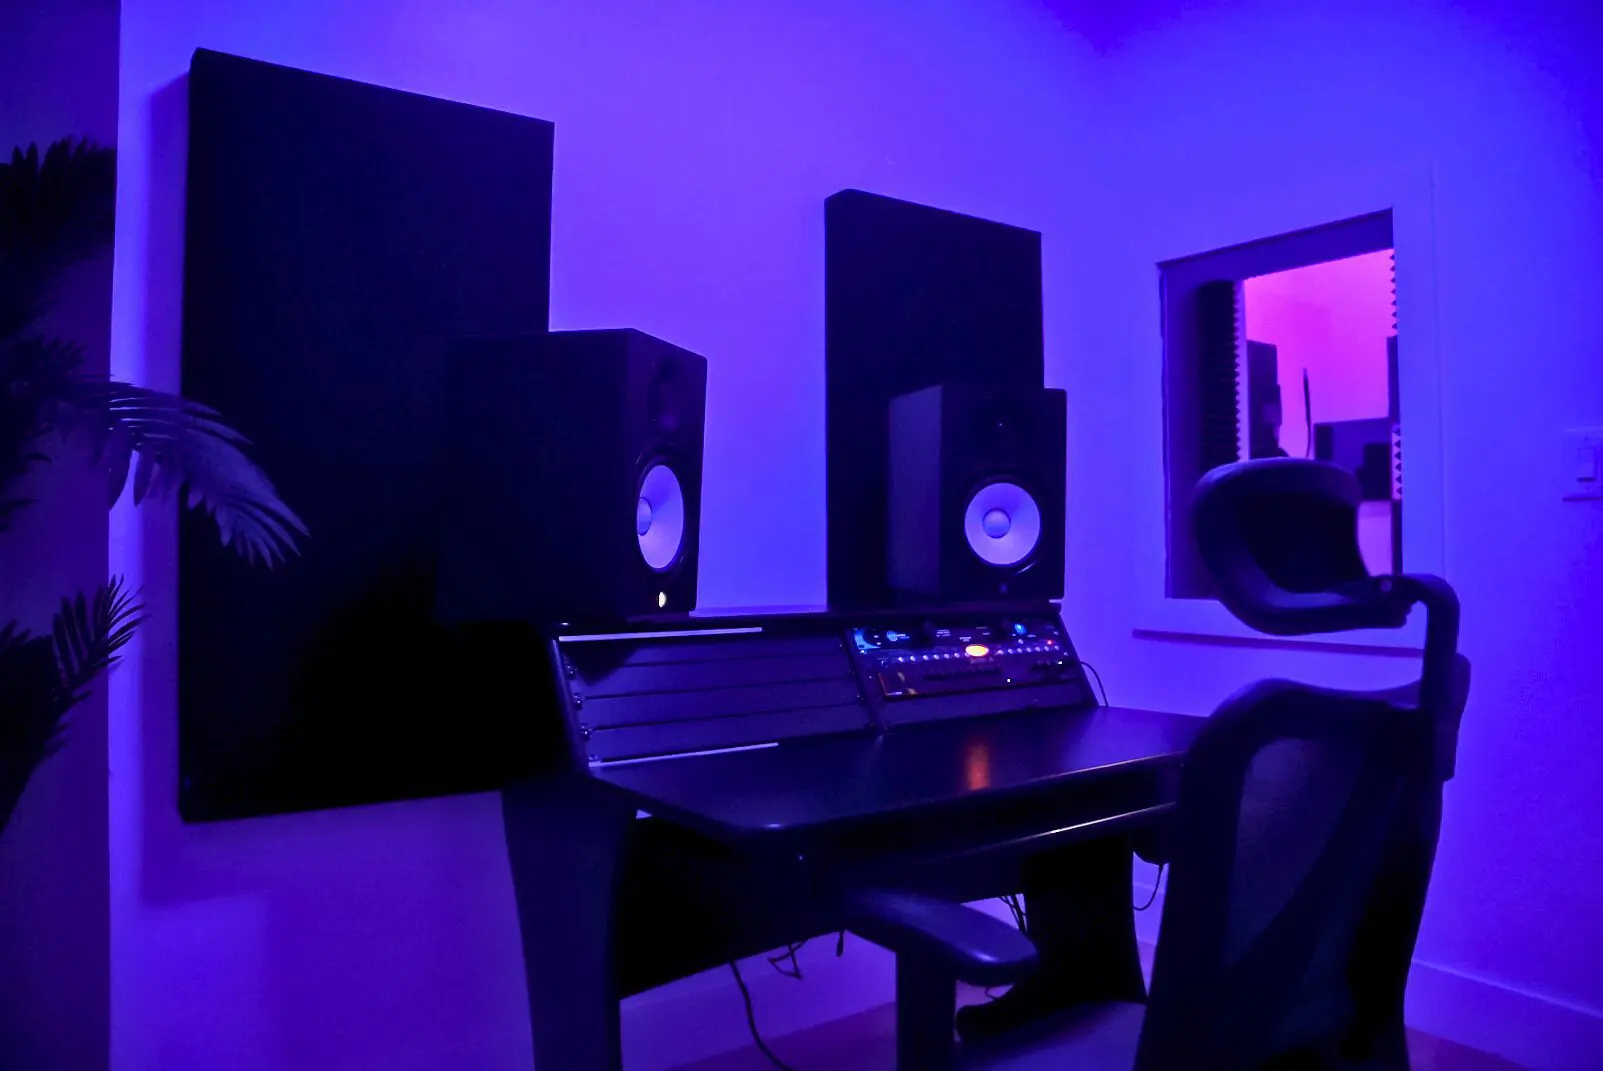 A purple theme room with music equipments